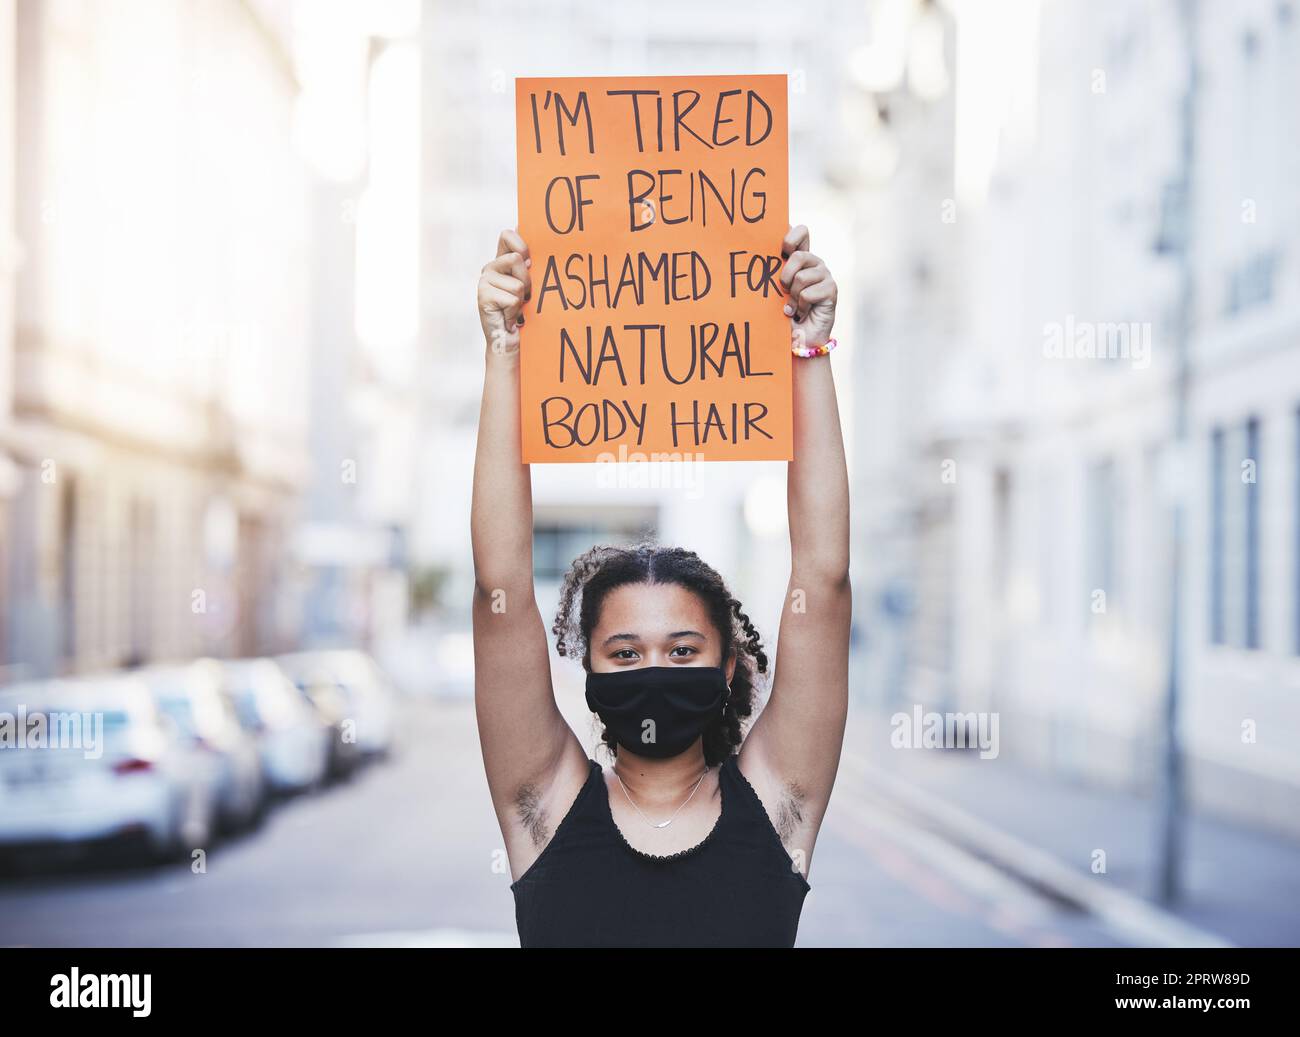 Women human rights, hair removal choice and protest, rally and feminist revolution against beauty standards, freedom and gender equality. Woman showing hairy body armpit, justice and poster opinion Stock Photo